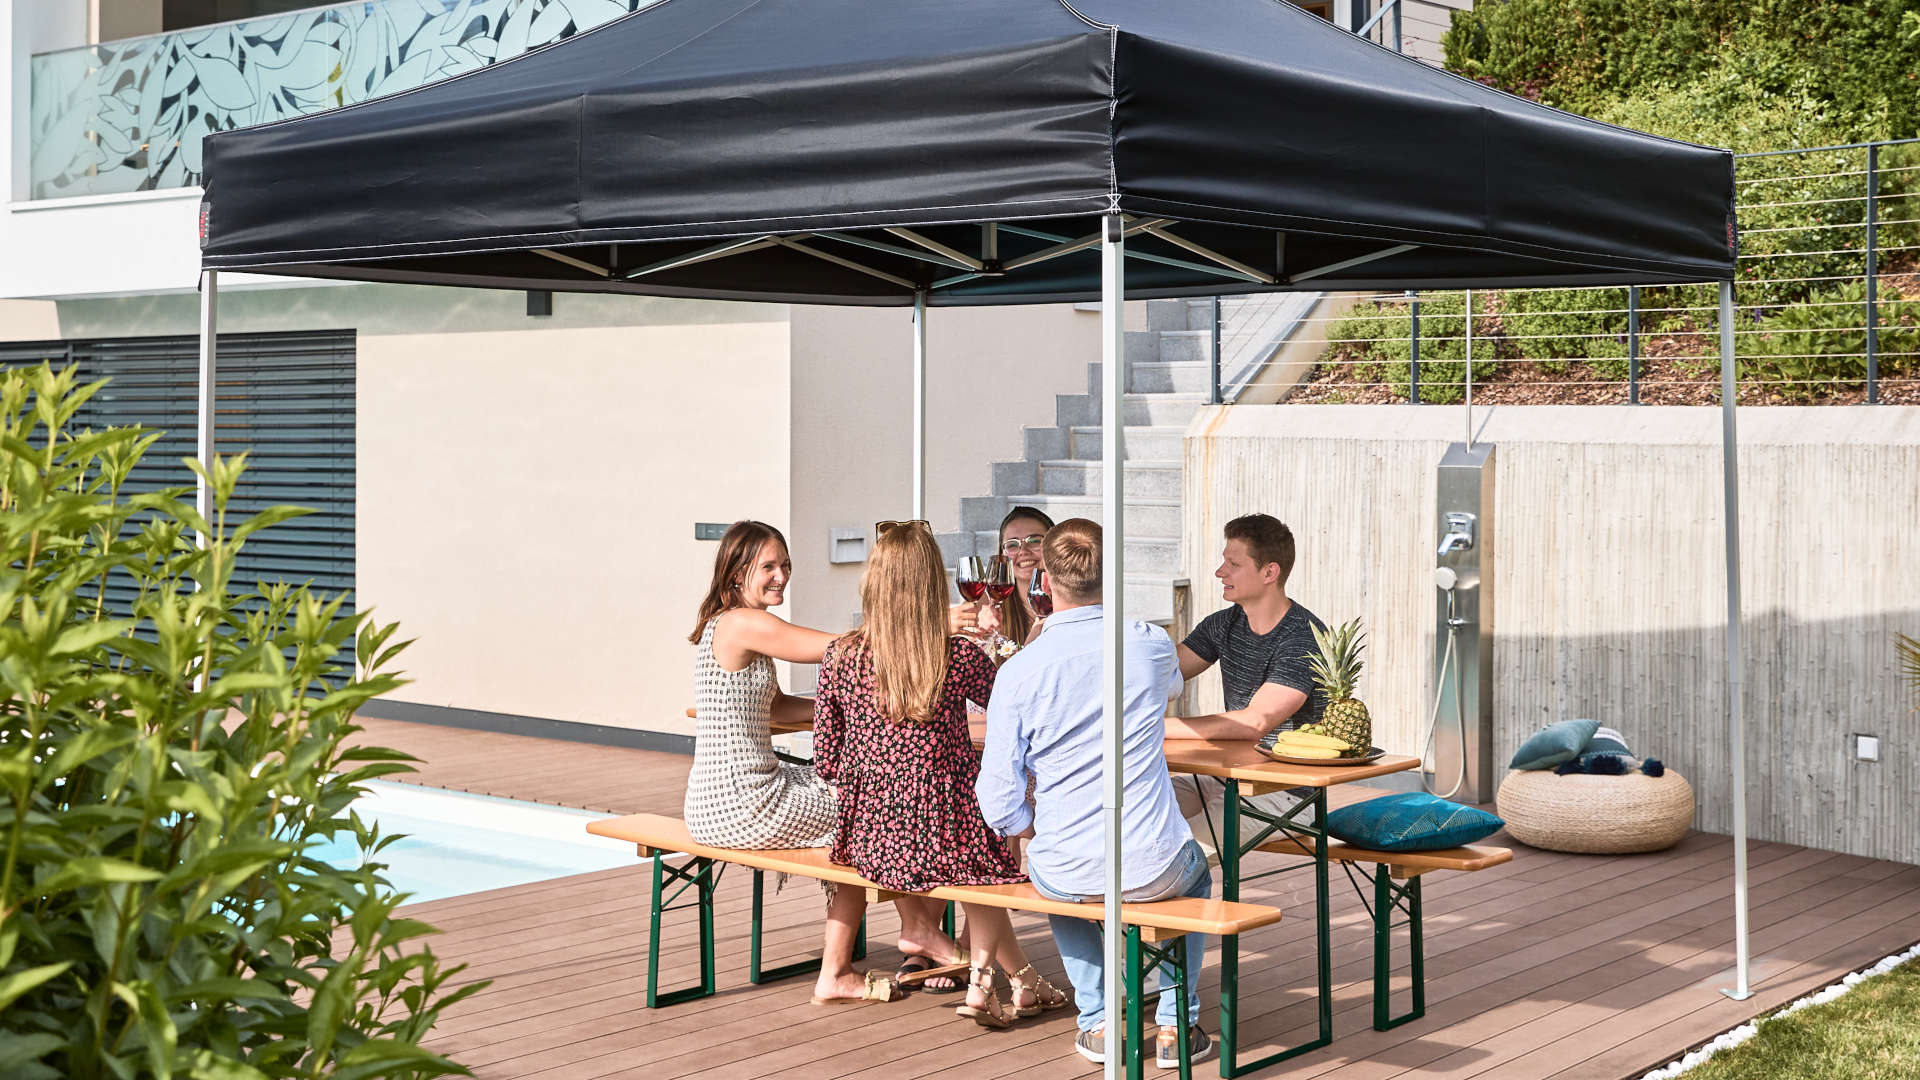 In the garden, the black 3x3 m folding canopy tent and classic beer garden table set. Friends spend the day in the garden in front of the pool.